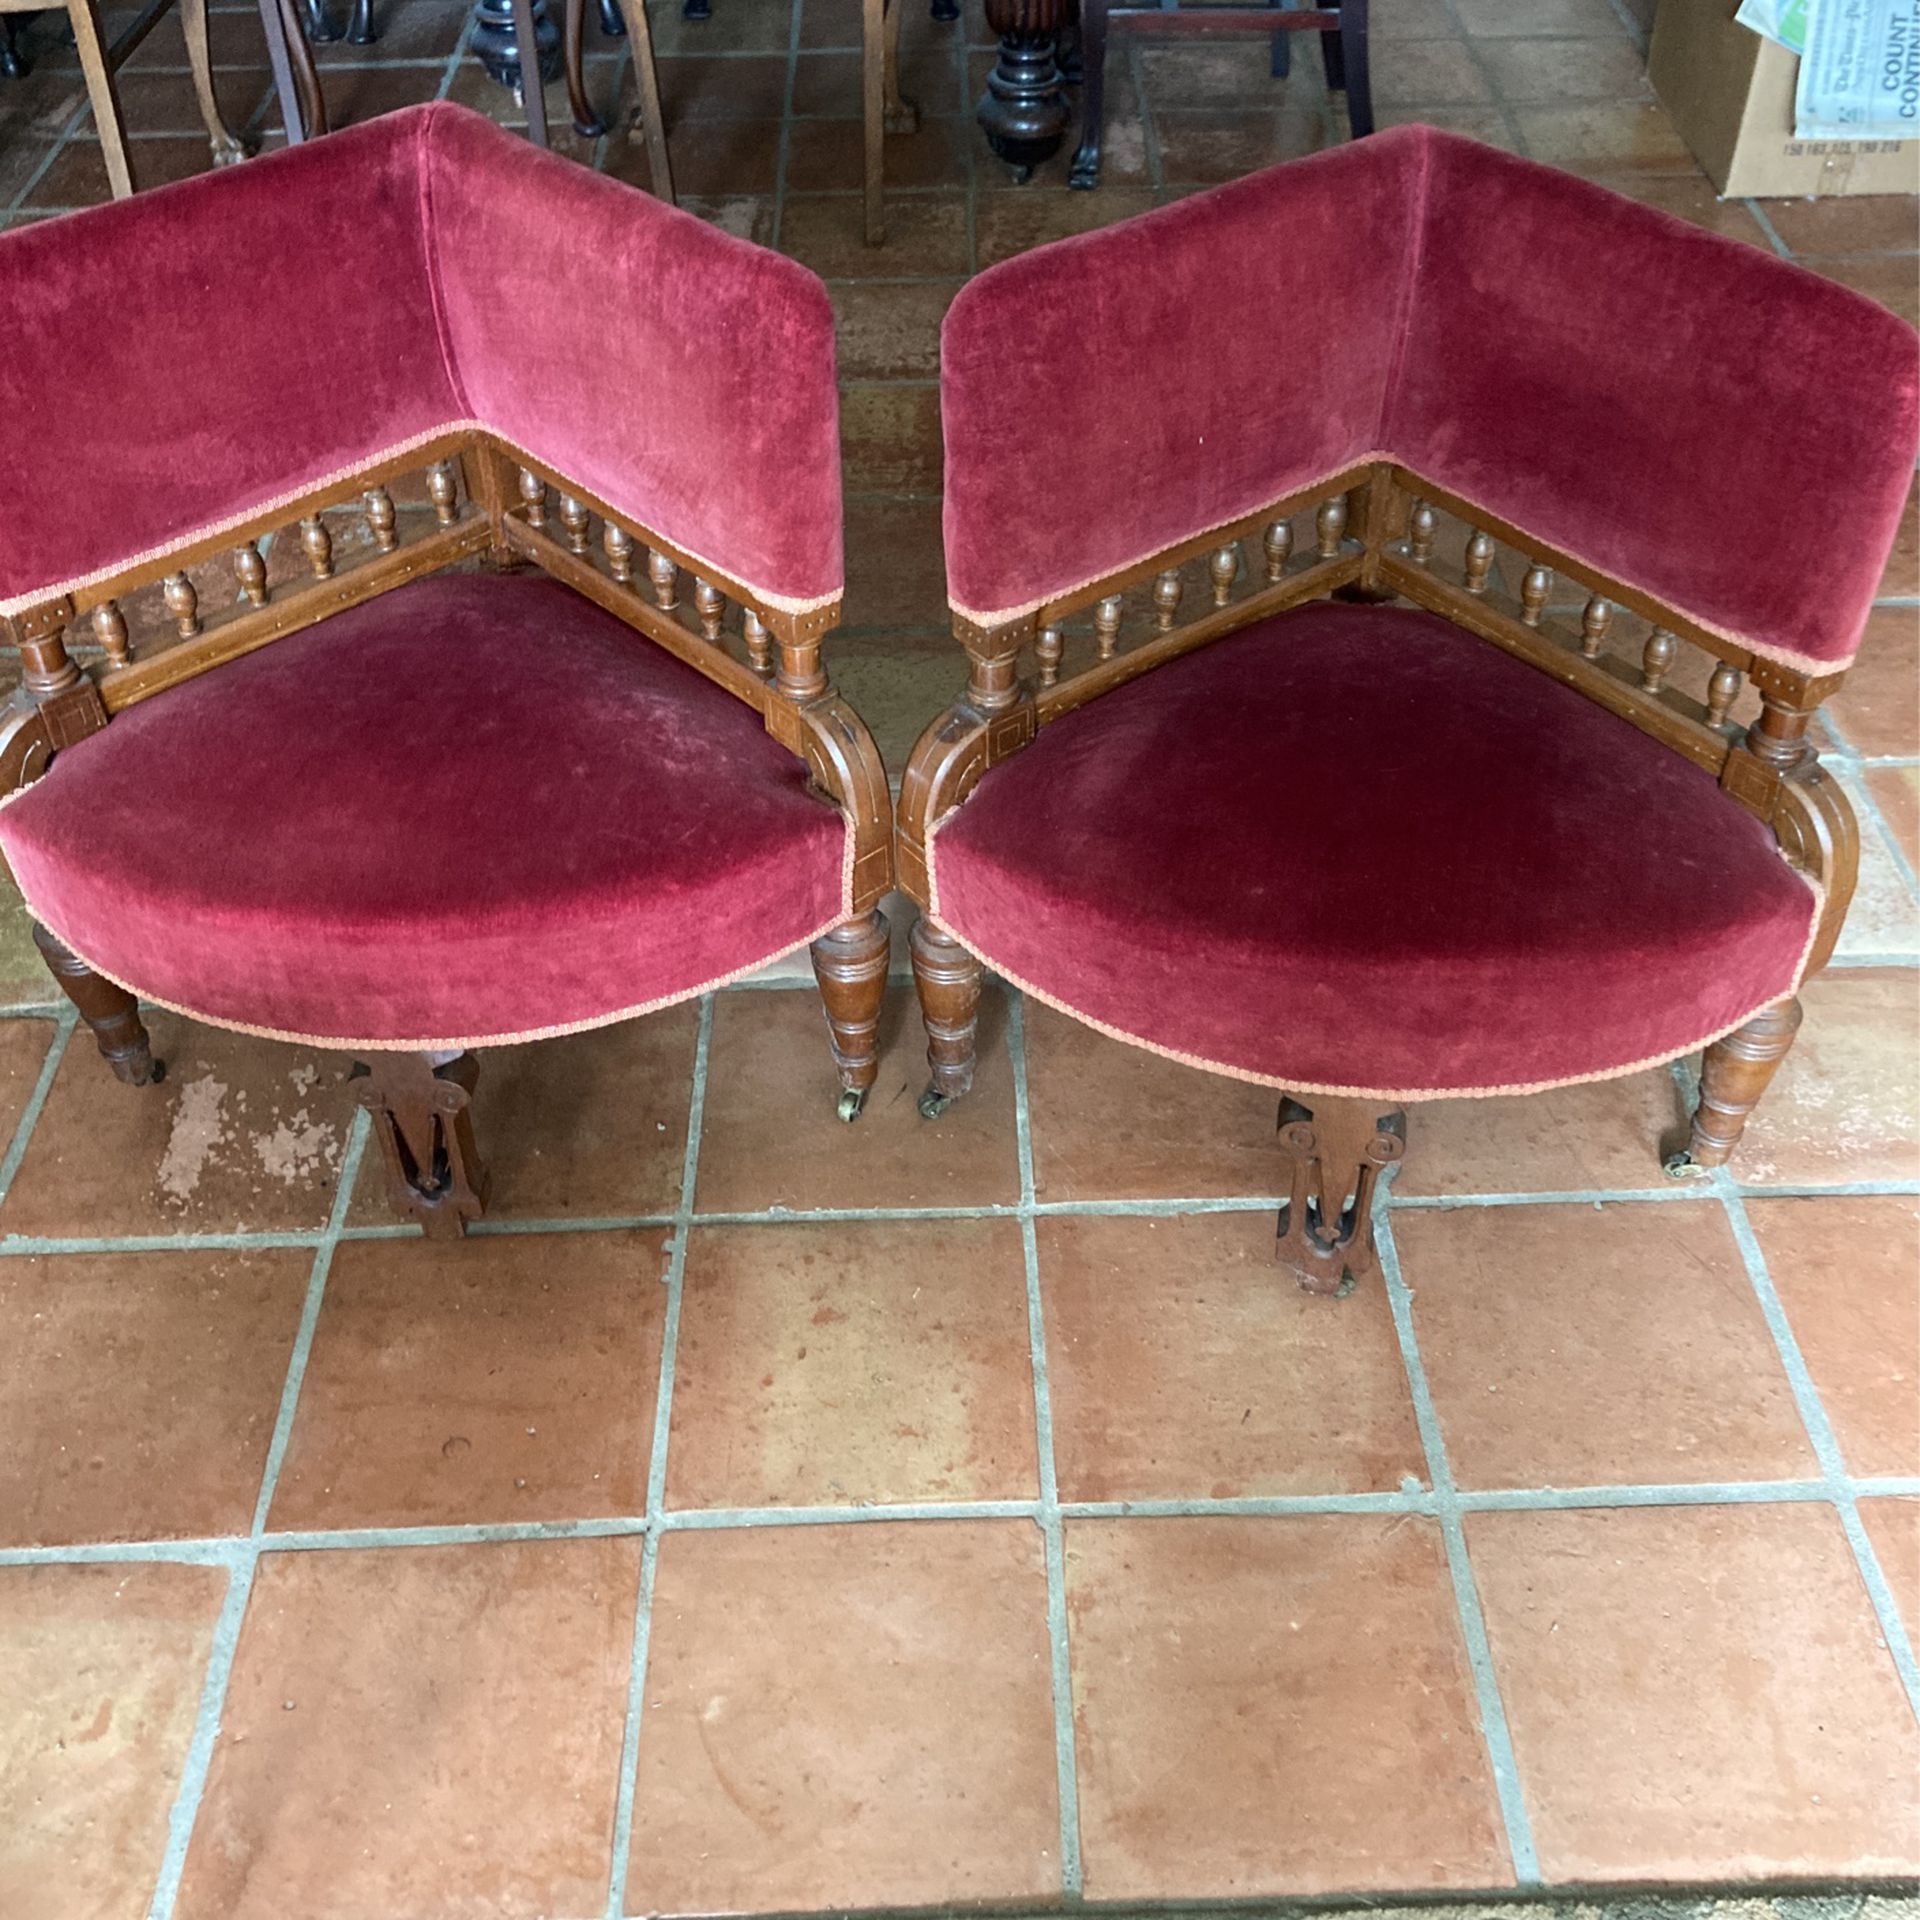 Rare Opportunity! Pair Of Antique Tête-à-Tete Chairs 